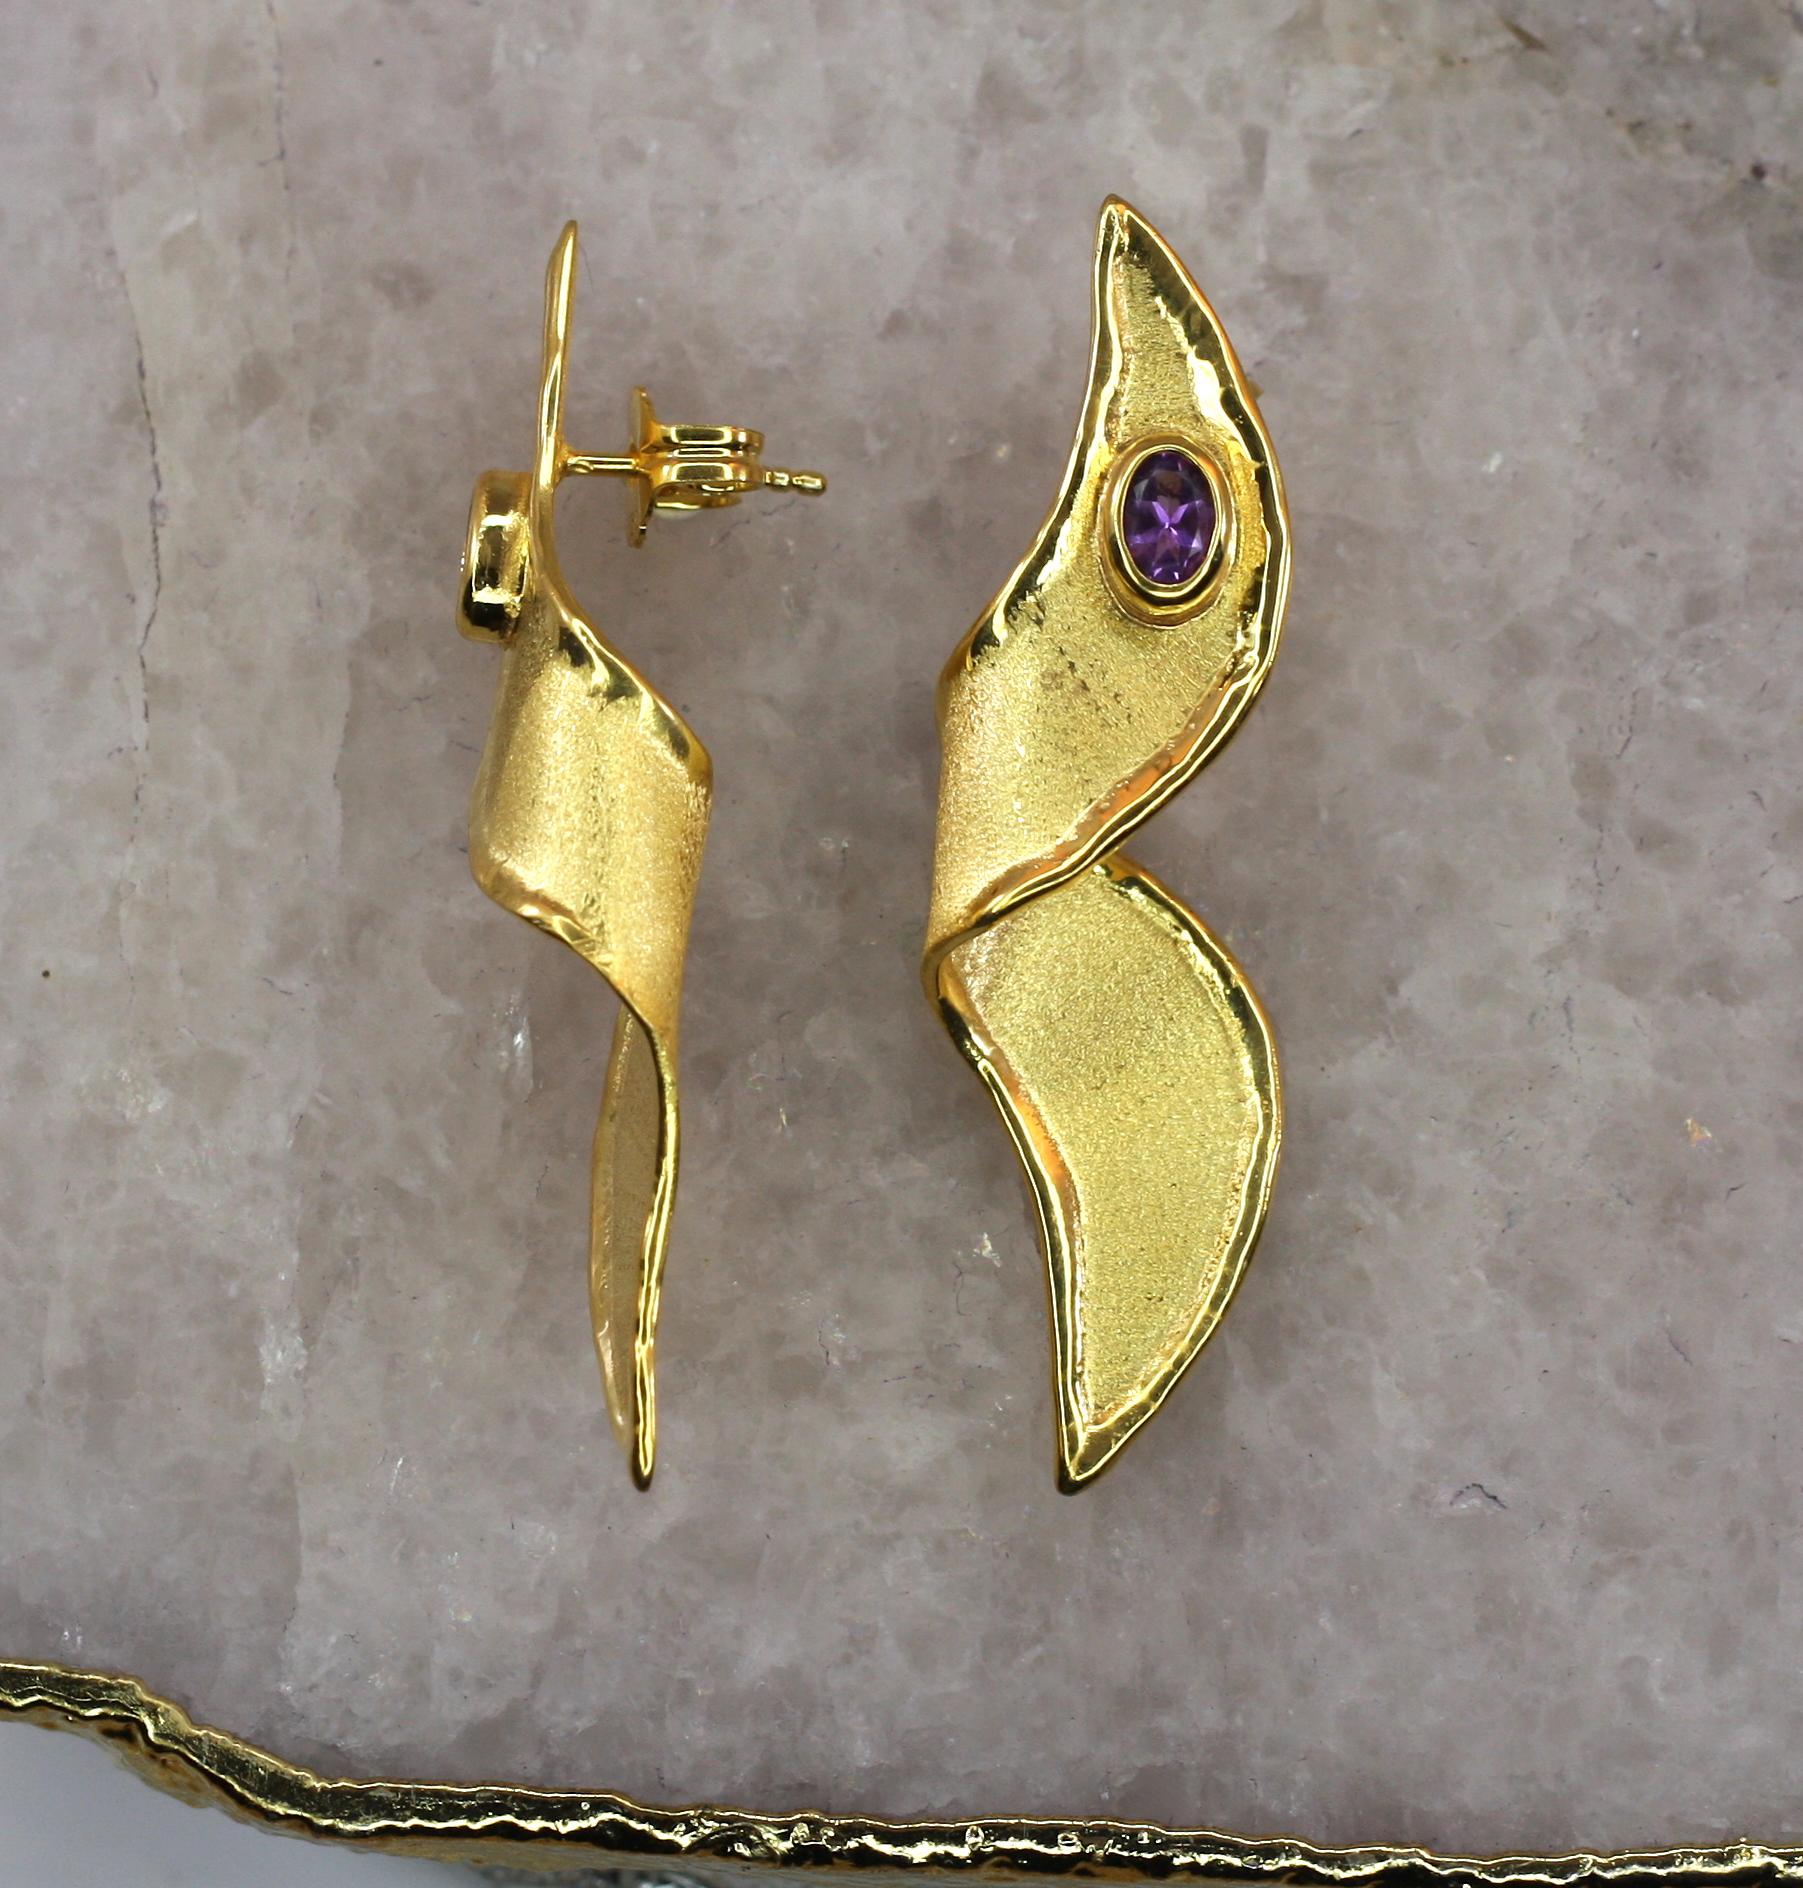 Yianni Creations presents unique artisan earrings crafted from 18 Karat yellow gold. These spiral earrings features 0.45 Carat oval cut Amethyst each.  Matching items available.
For a full selection of Yianni Creations (YC) jewelry please visit our